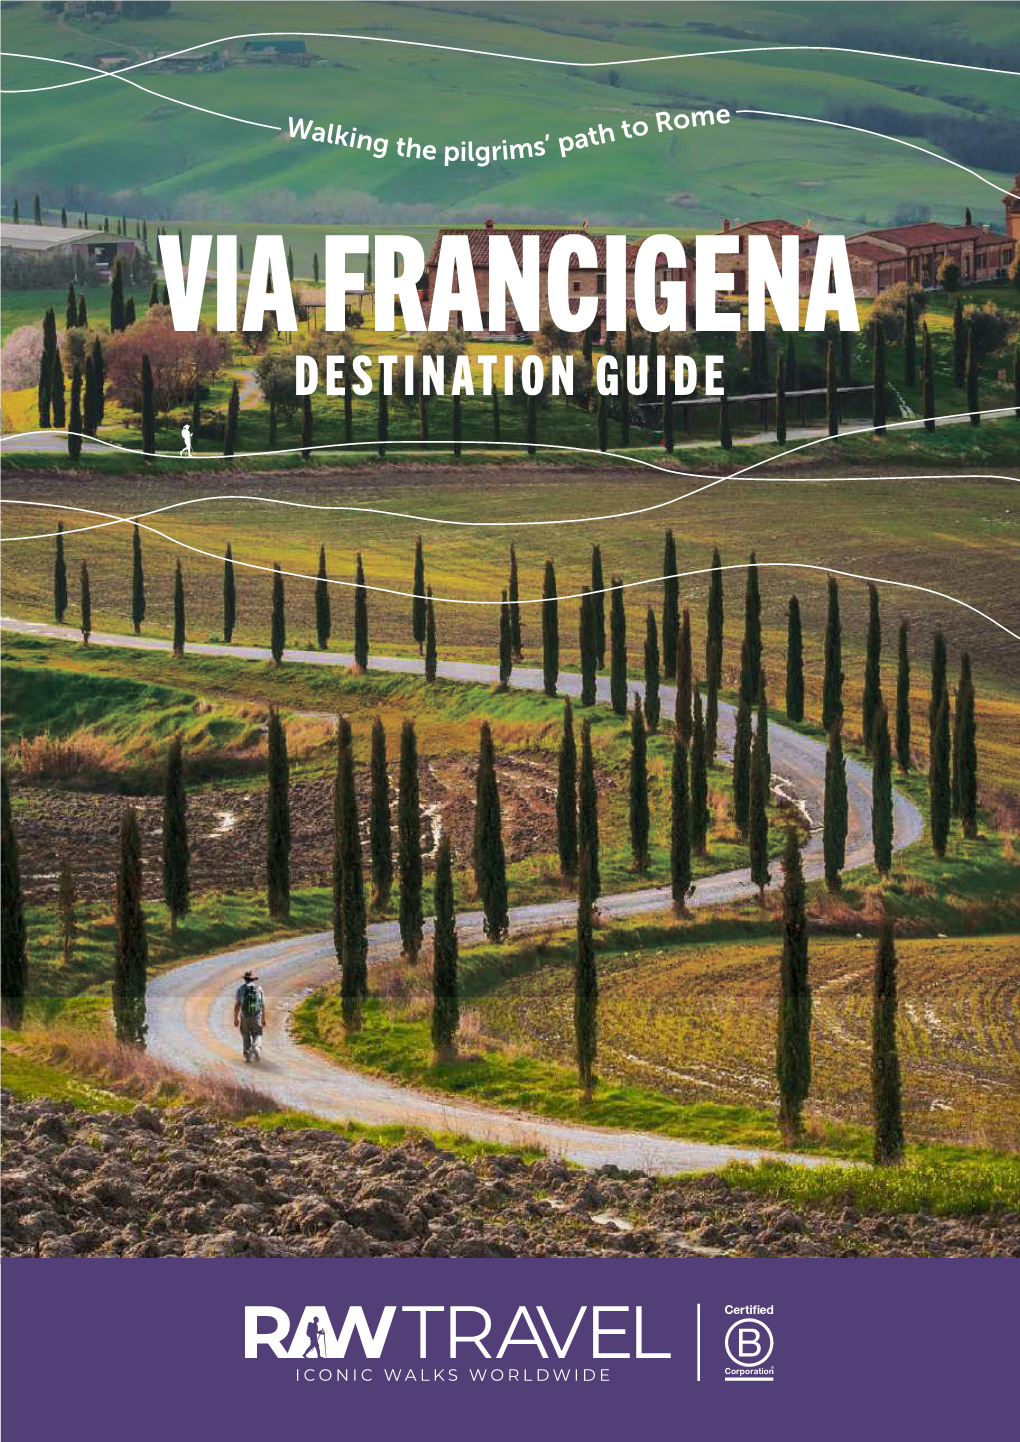 VIA FRANCIGENA DESTINATION GUIDE Disclaimer VIA FRANCIGENA the Information in This Destination Guide Has Been Compiled with Care and Is Provided in Good Faith